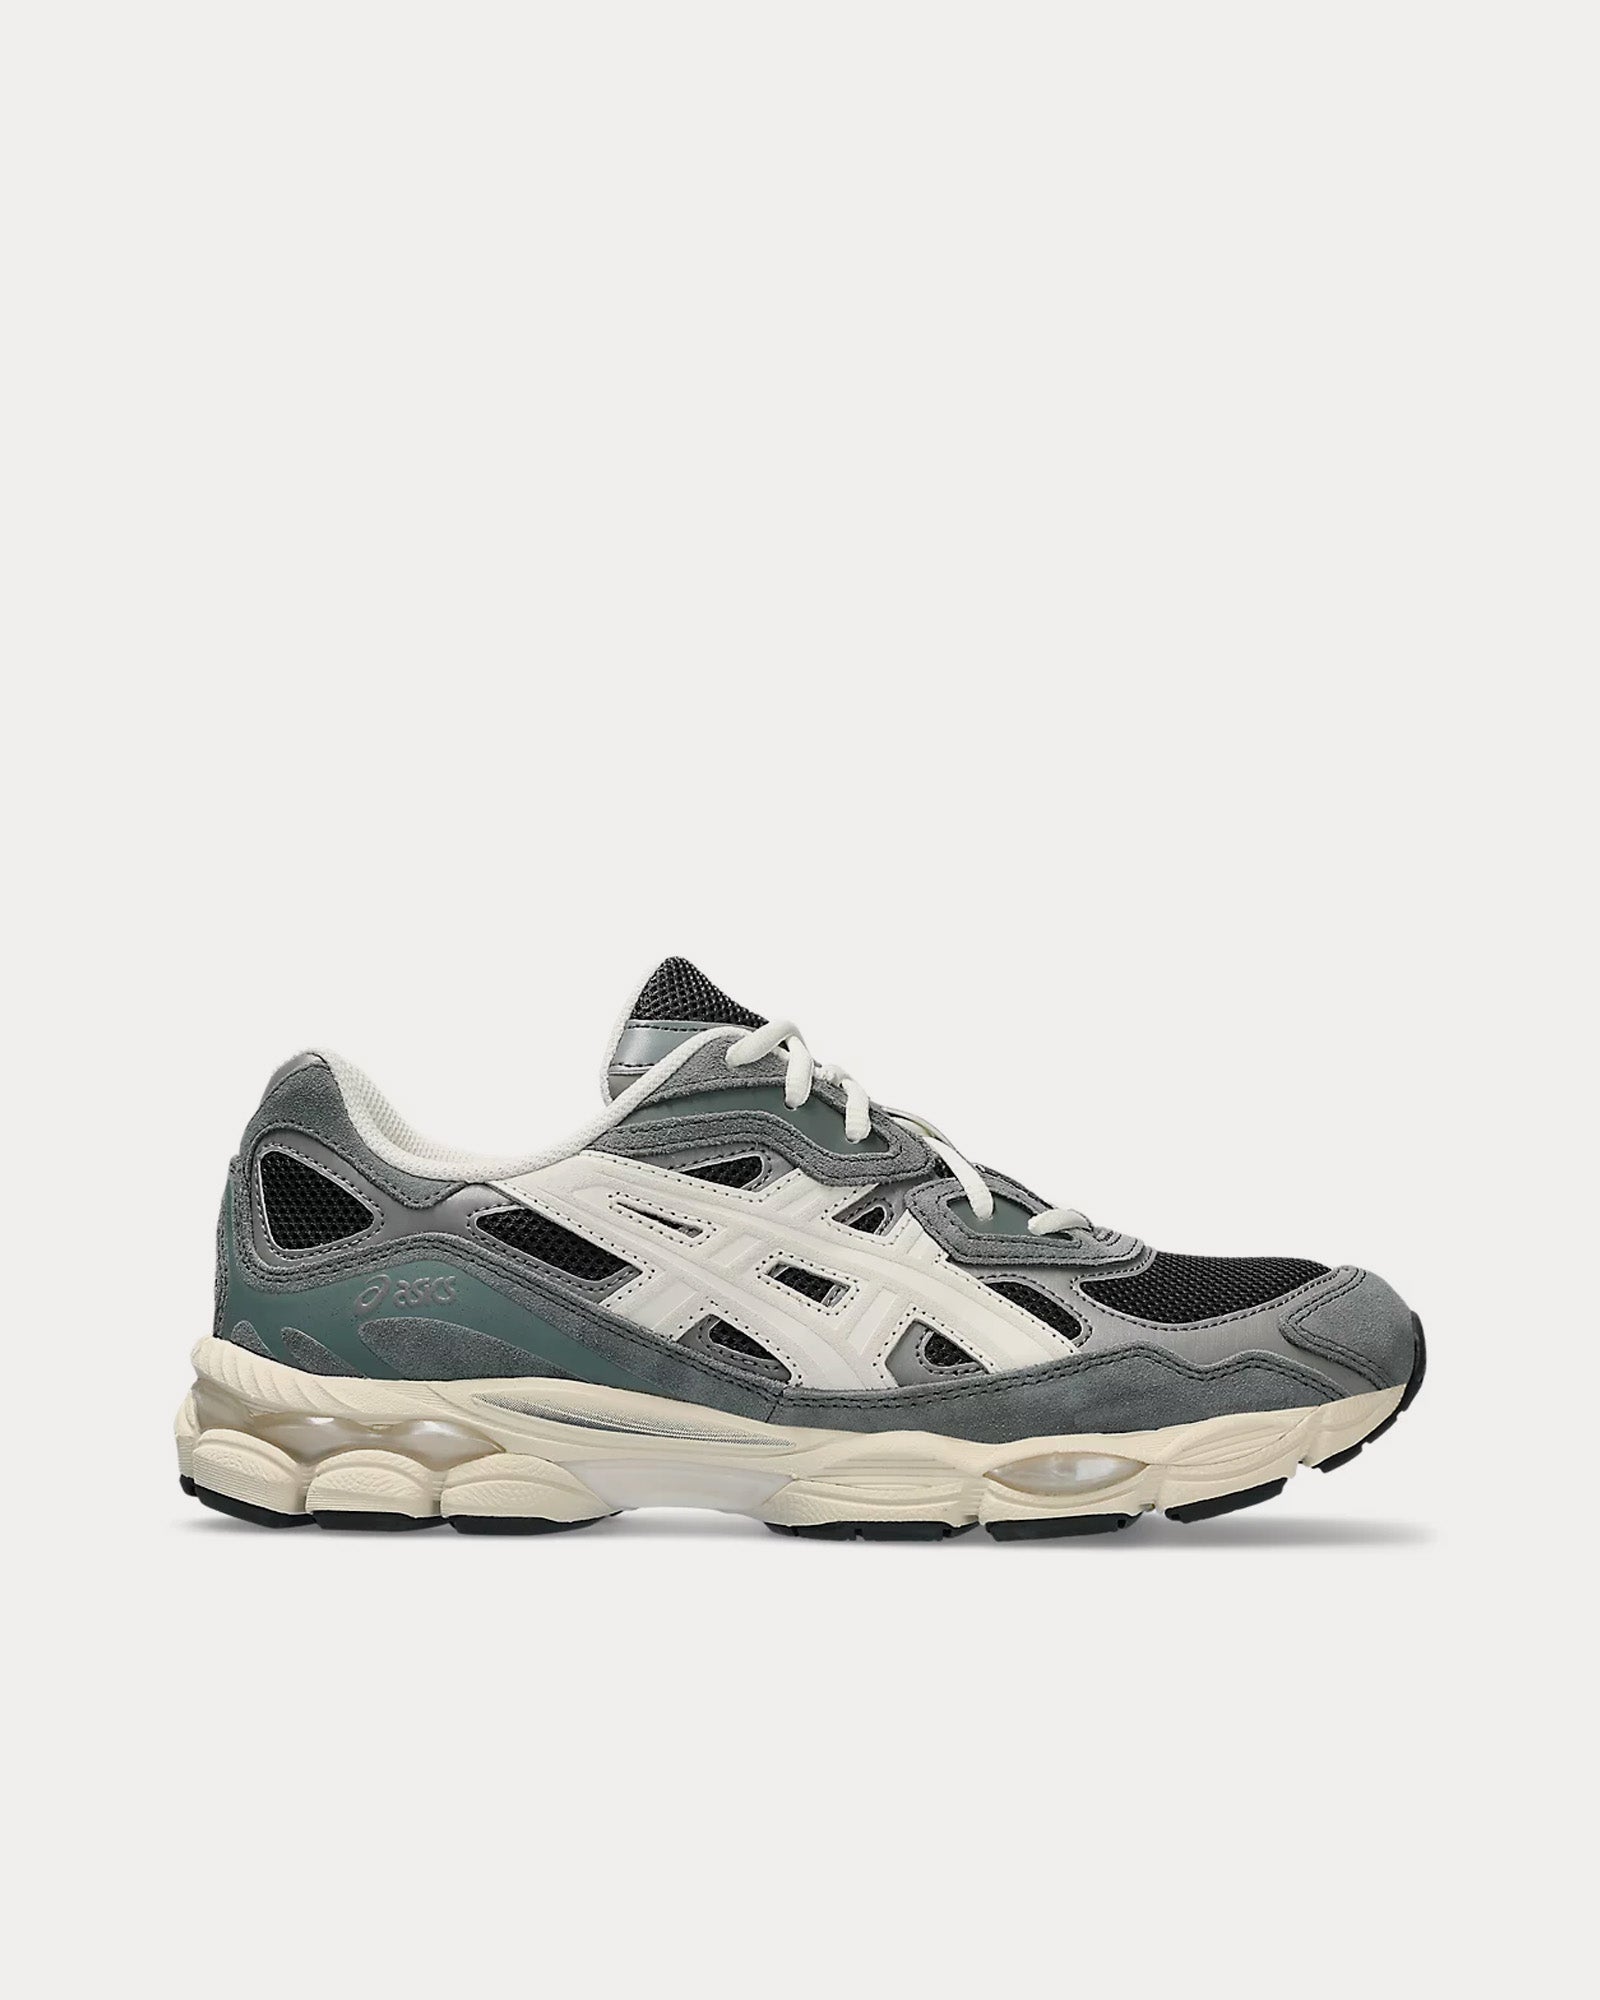 The ASICS GEL-NYC Appears In Ivy/Grey